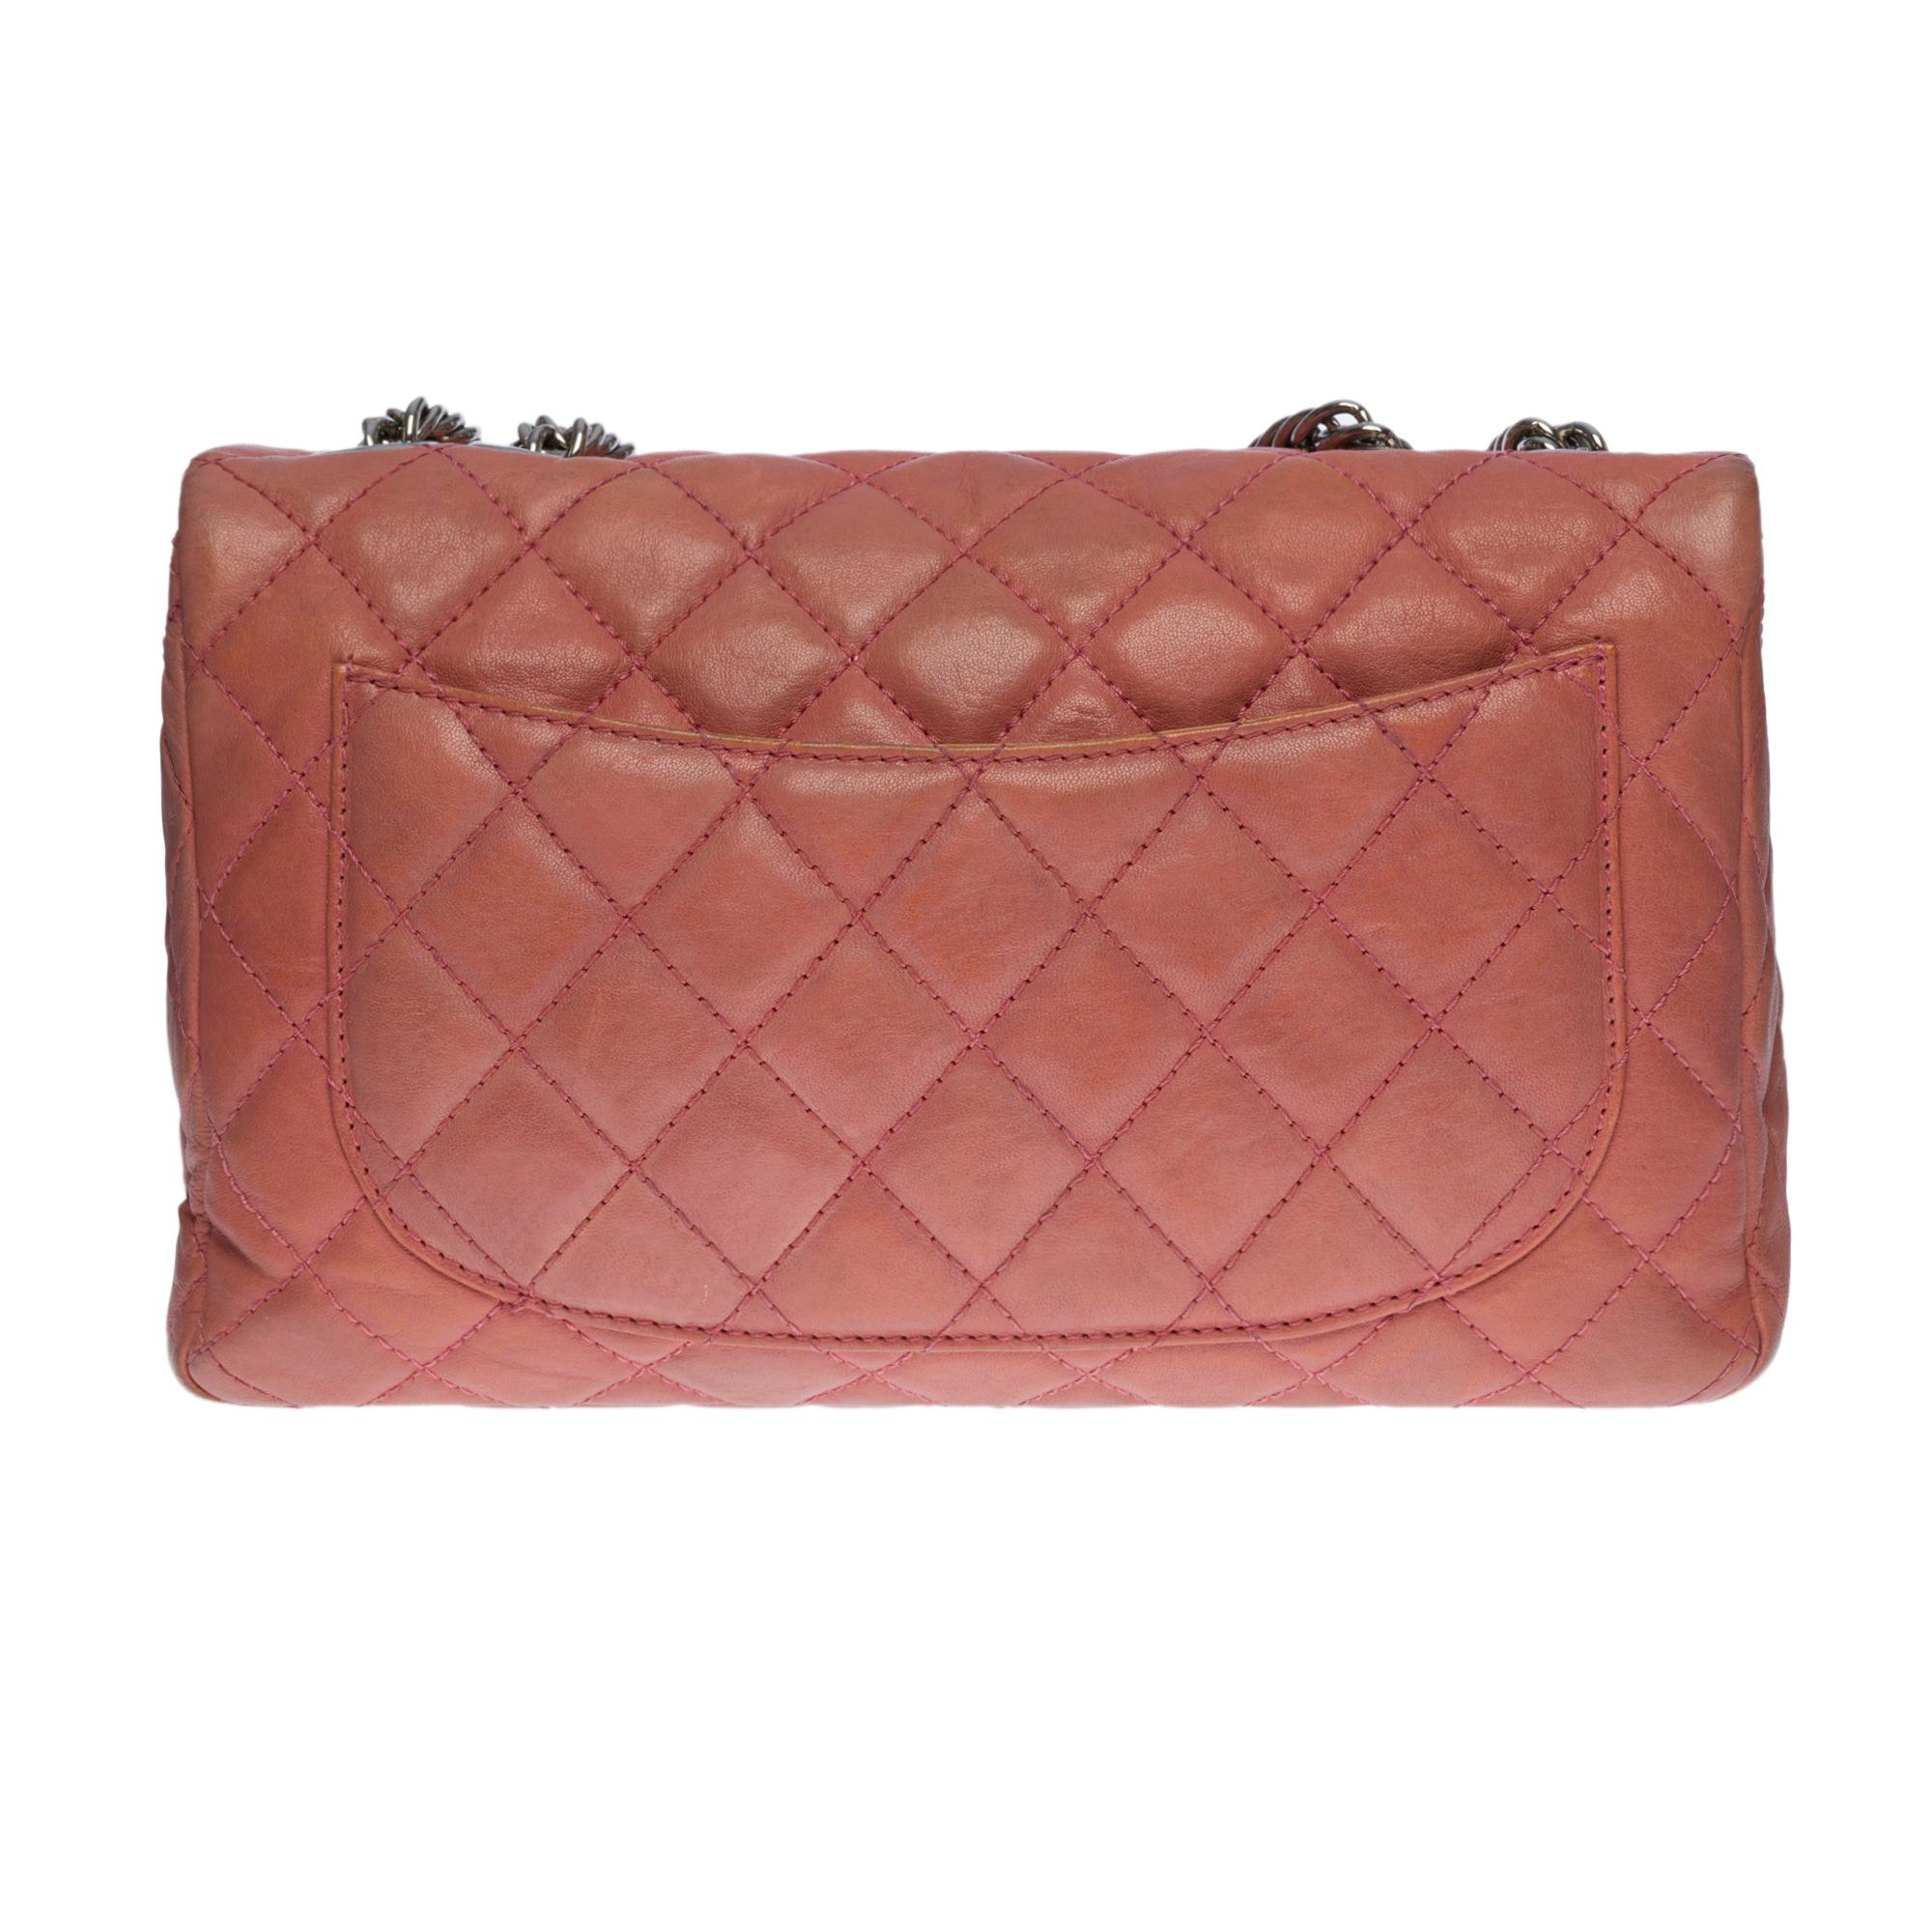  The Chanel Timeless/Classique Jumbo single flap bag handbag in powder pink aged quilted lambskin, hardware in silver metal, snake chain in silver metal allowing the bag to be worn on the shoulder or accross the body

Patch pocket on the back of the